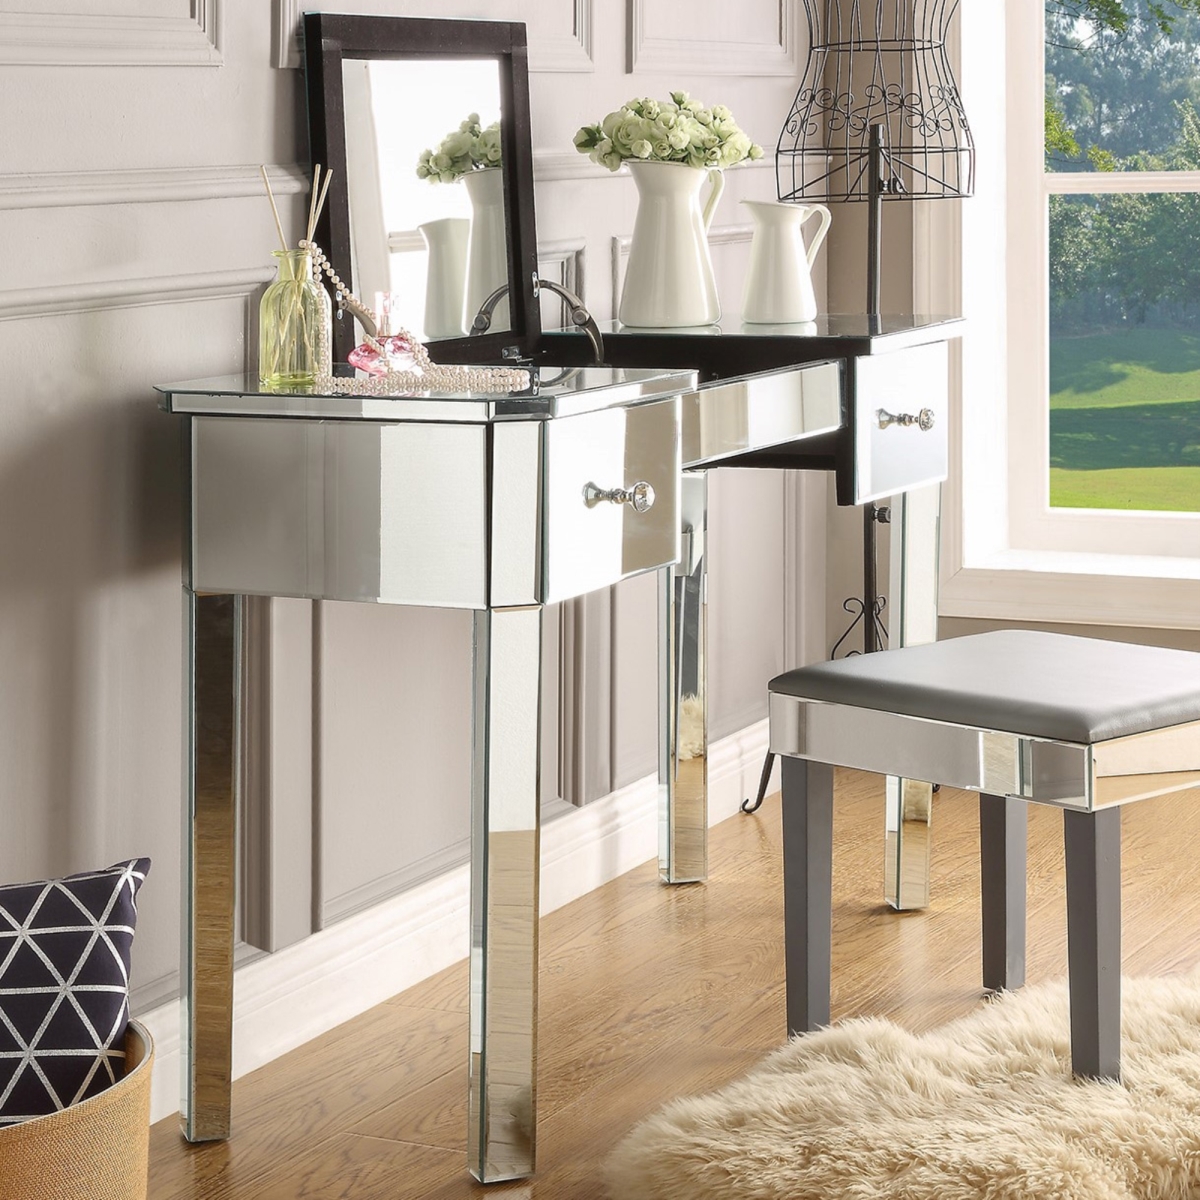 Posh Living JF78-07NC-UE Two Drawers & Lift-Up Top Rylee Mirrored Makeup Vanity Table - 31 x 18 x 47 in.